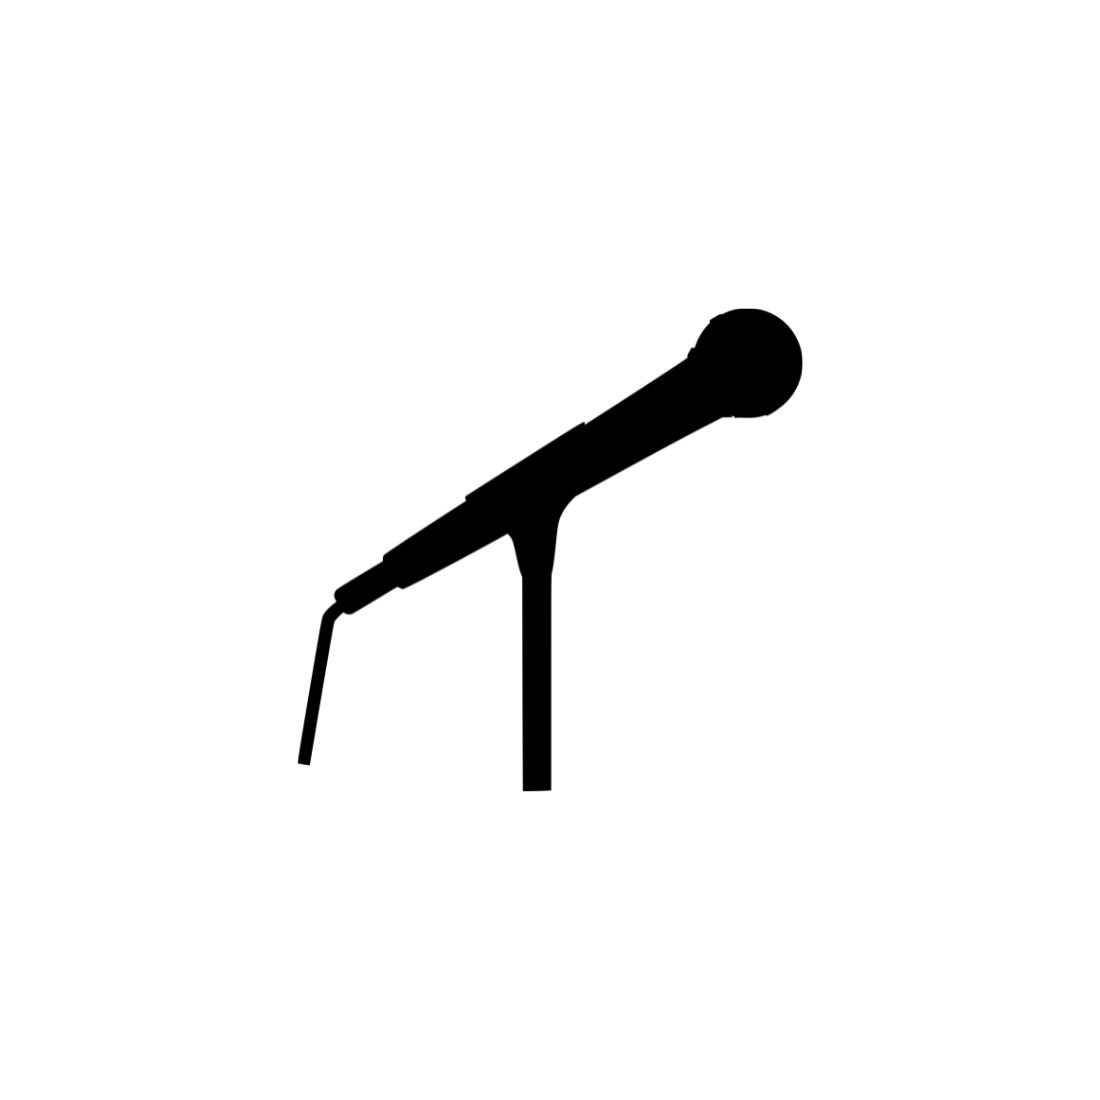 Microphone Silhouette Bundle Preview image.